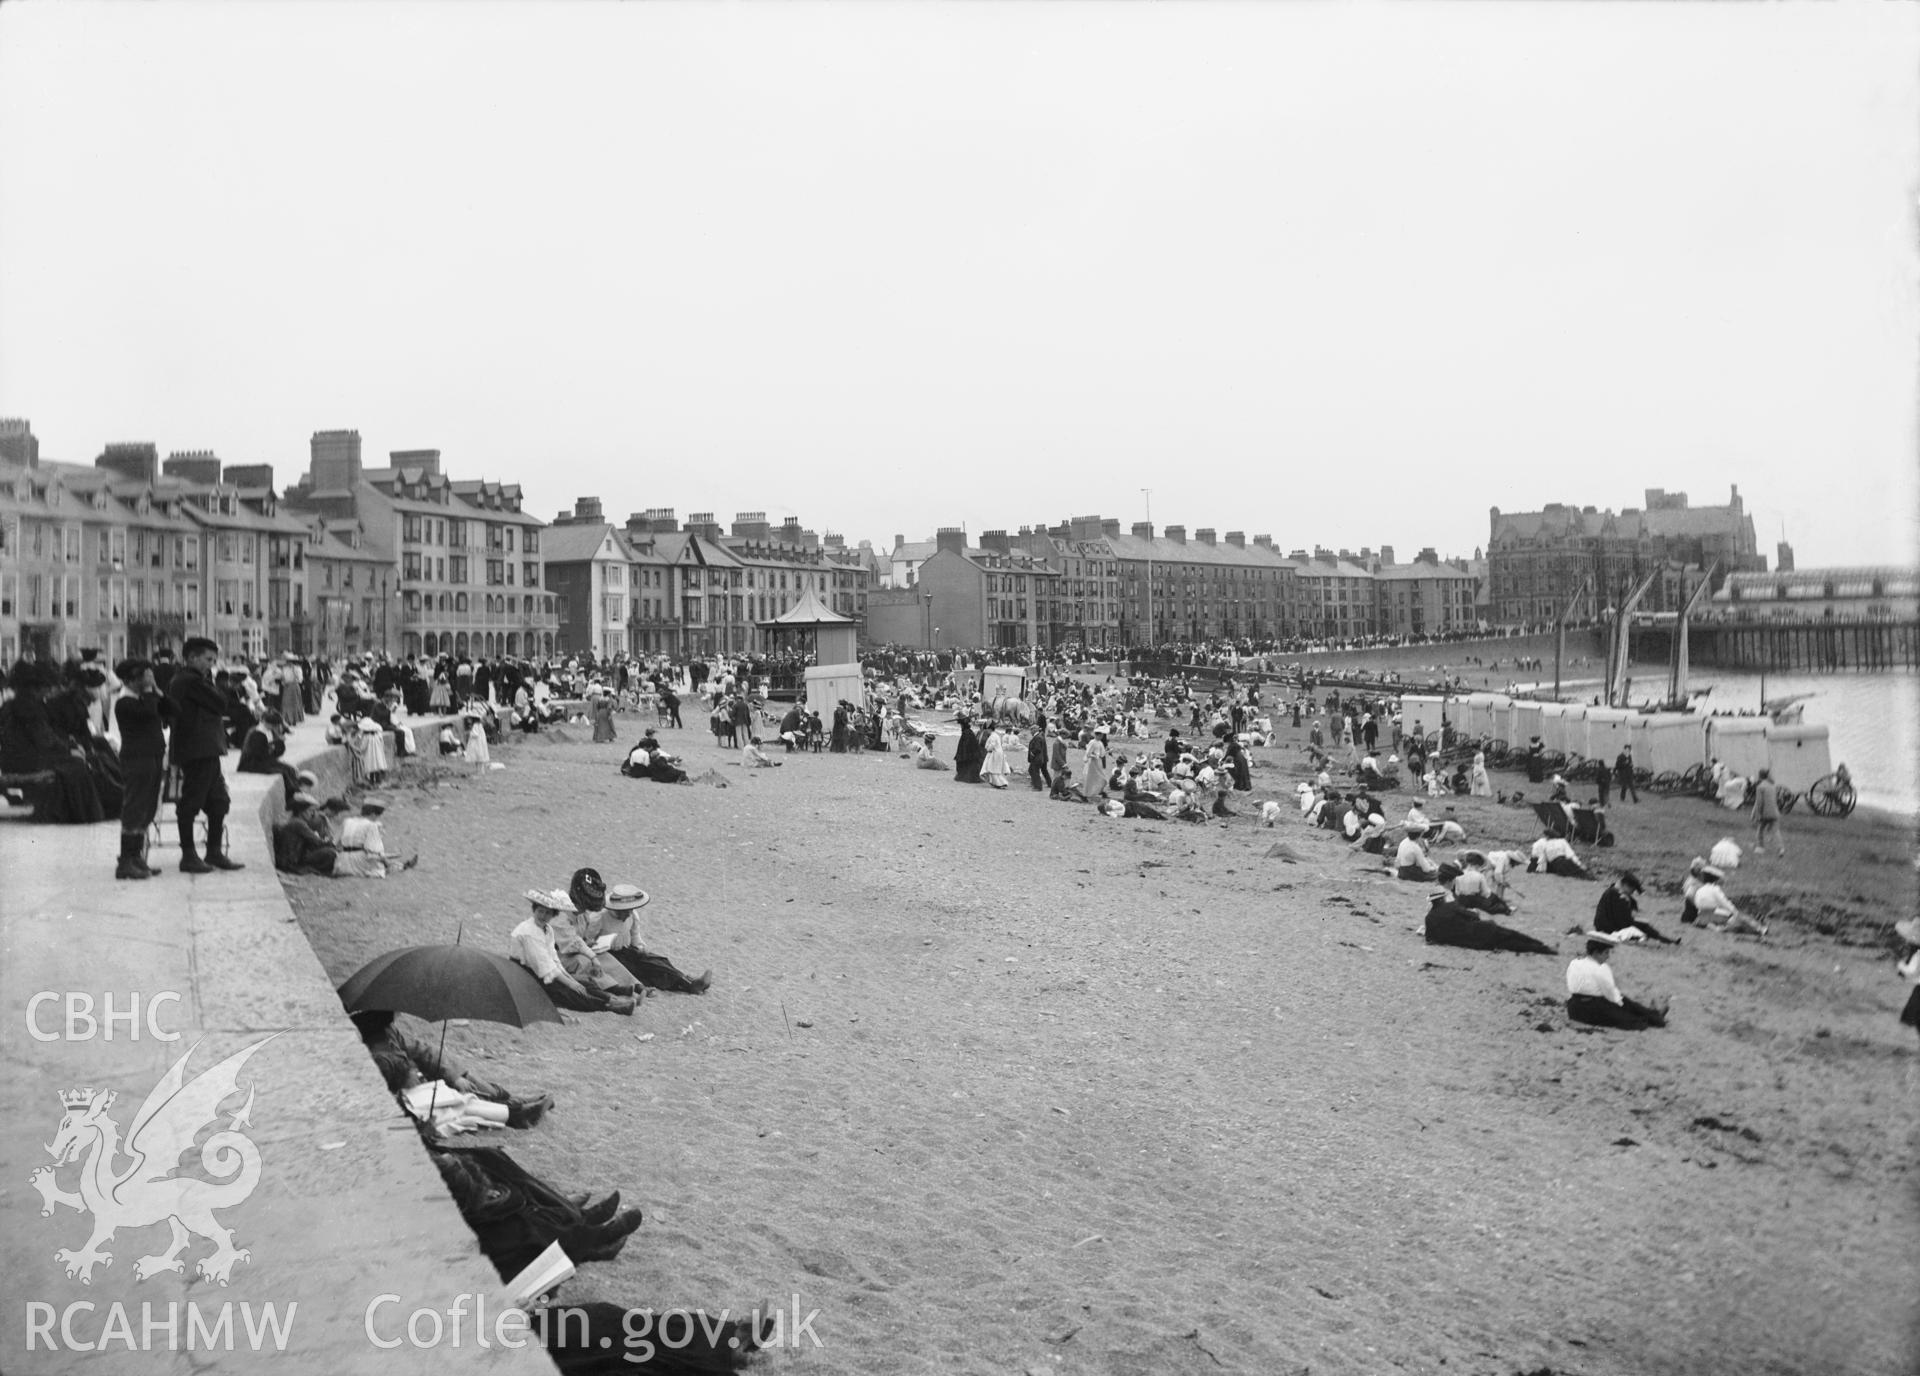 Black and white image dating from c.1910 showing a busy beach scene at Aberystwyth with Marine Terrace in the background.